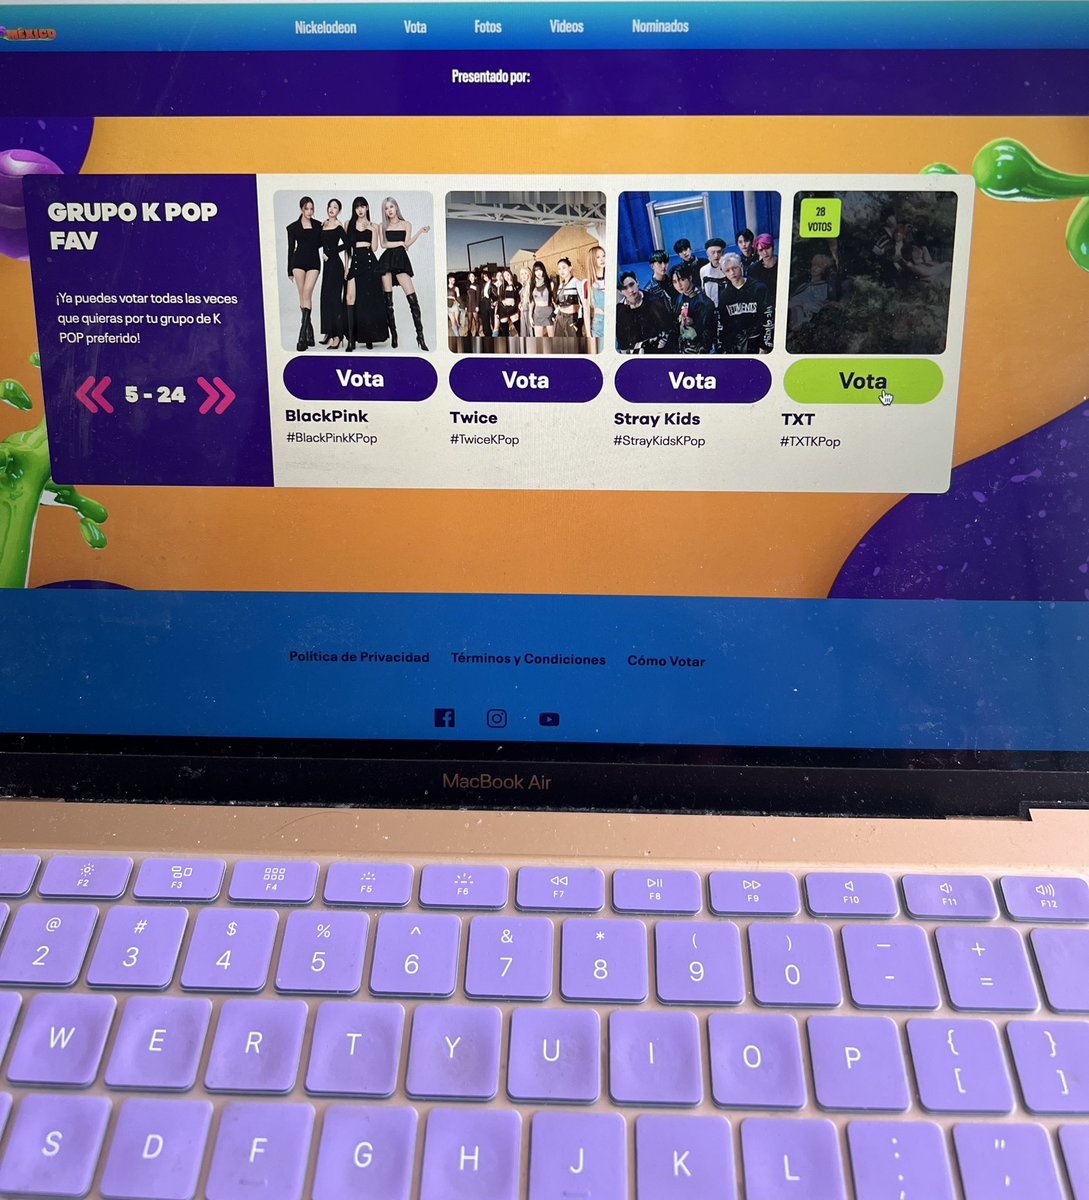 Moas as your voting for txt in vmas, fannstar and buying dilt for hot100 entry please remember txt is also nominated for kids choice awards for Mexico and it’s easy voting. No login in, just click 5 times wait for 5 seconds and continue again! Let’s get txt to win everything!